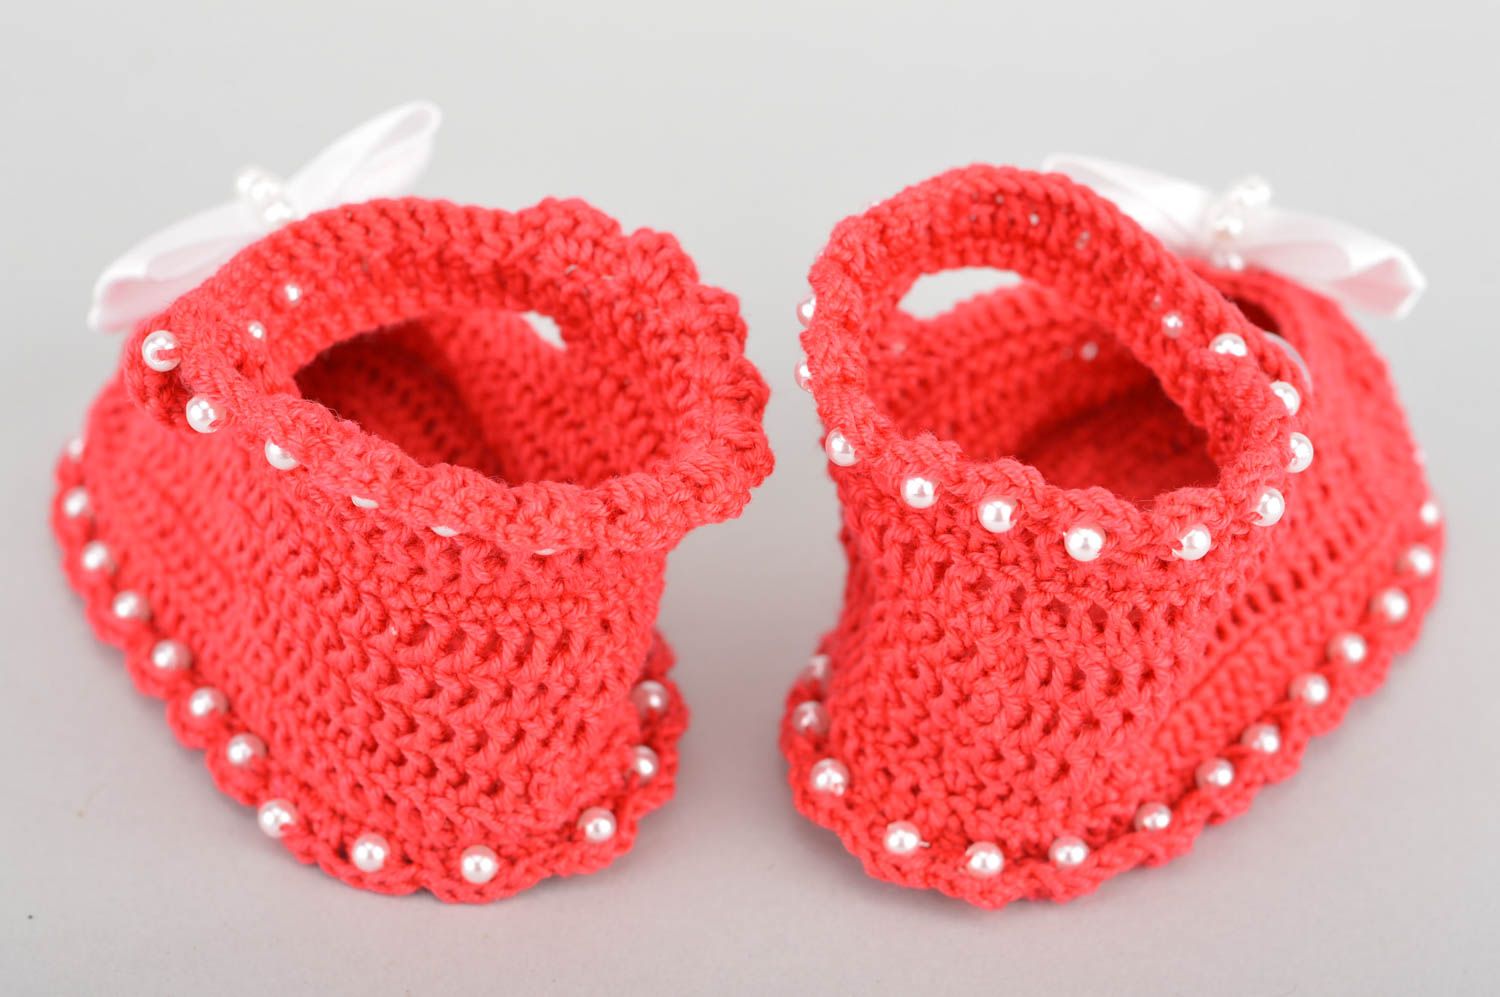 Handmade designer cotton crocheted bright red baby shoes with white bows photo 5